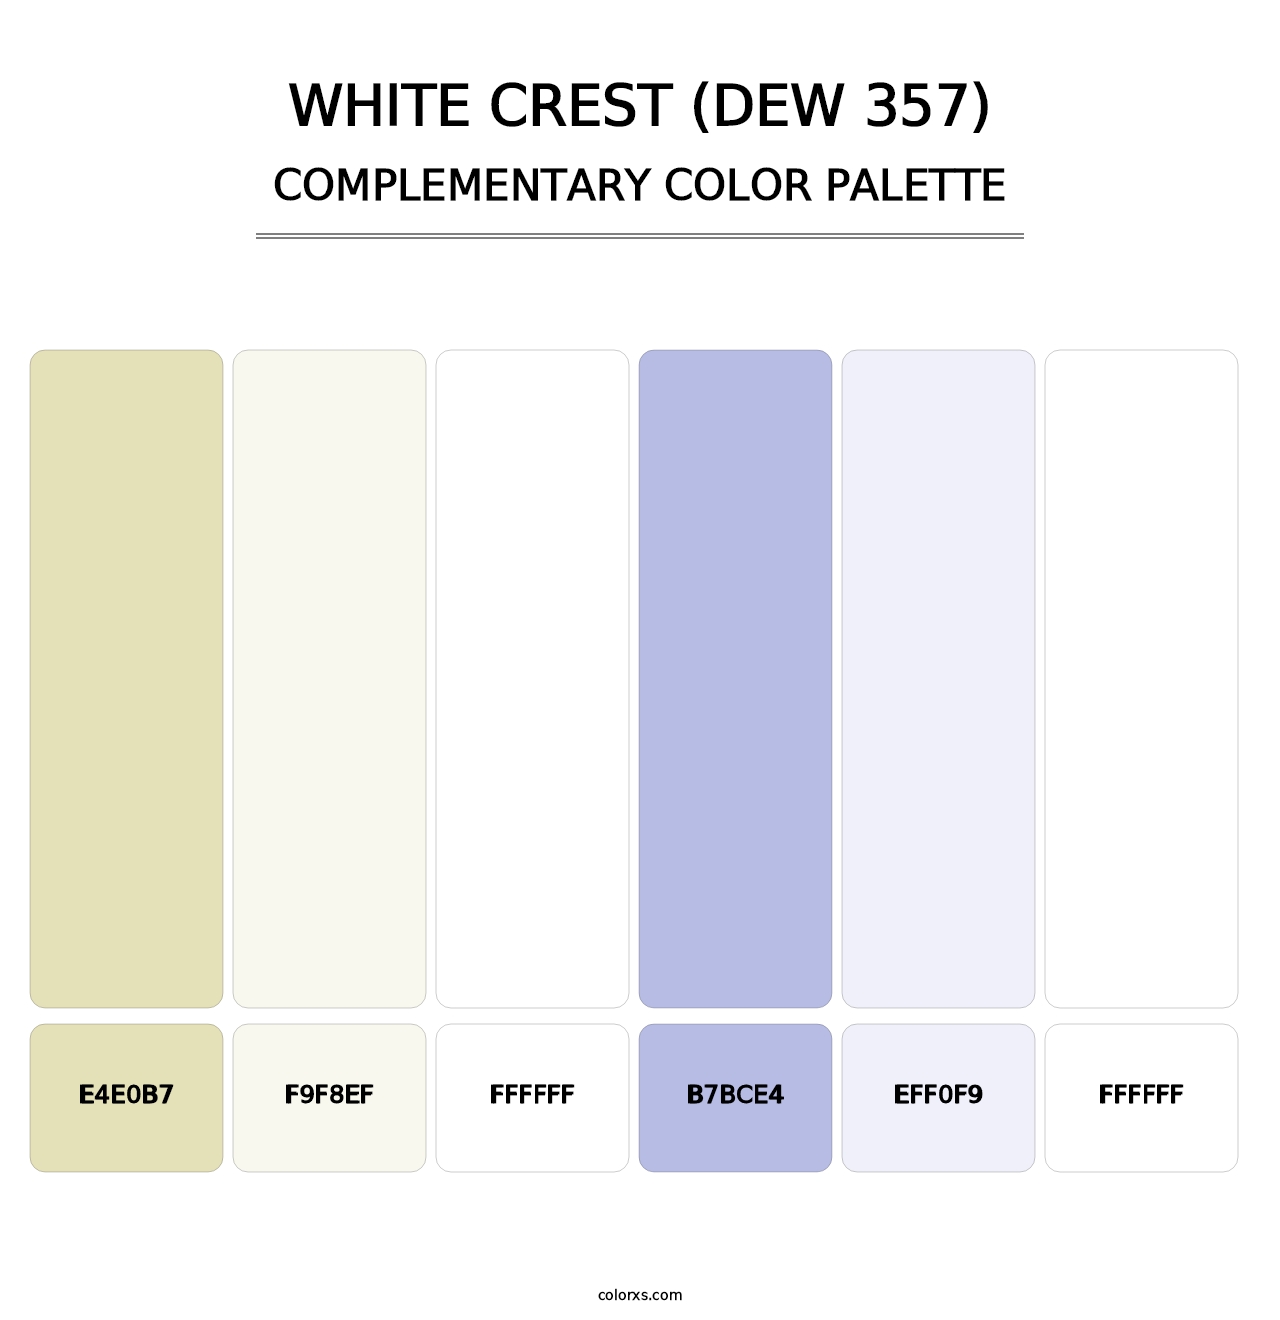 White Crest (DEW 357) - Complementary Color Palette